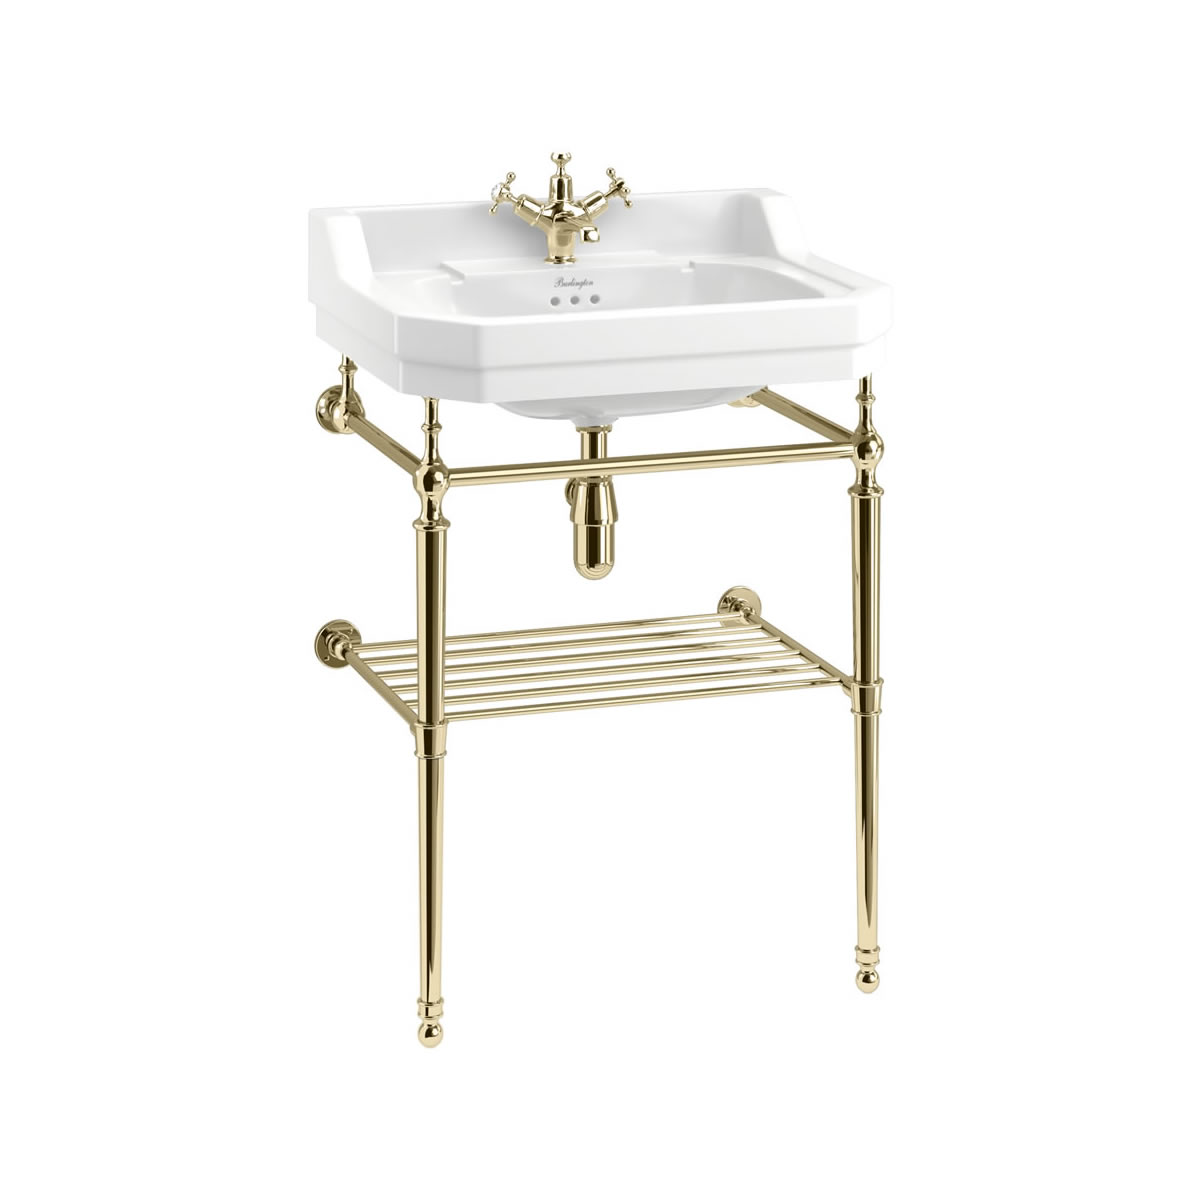 Optional towel rack forbasin stand T23A GOLD